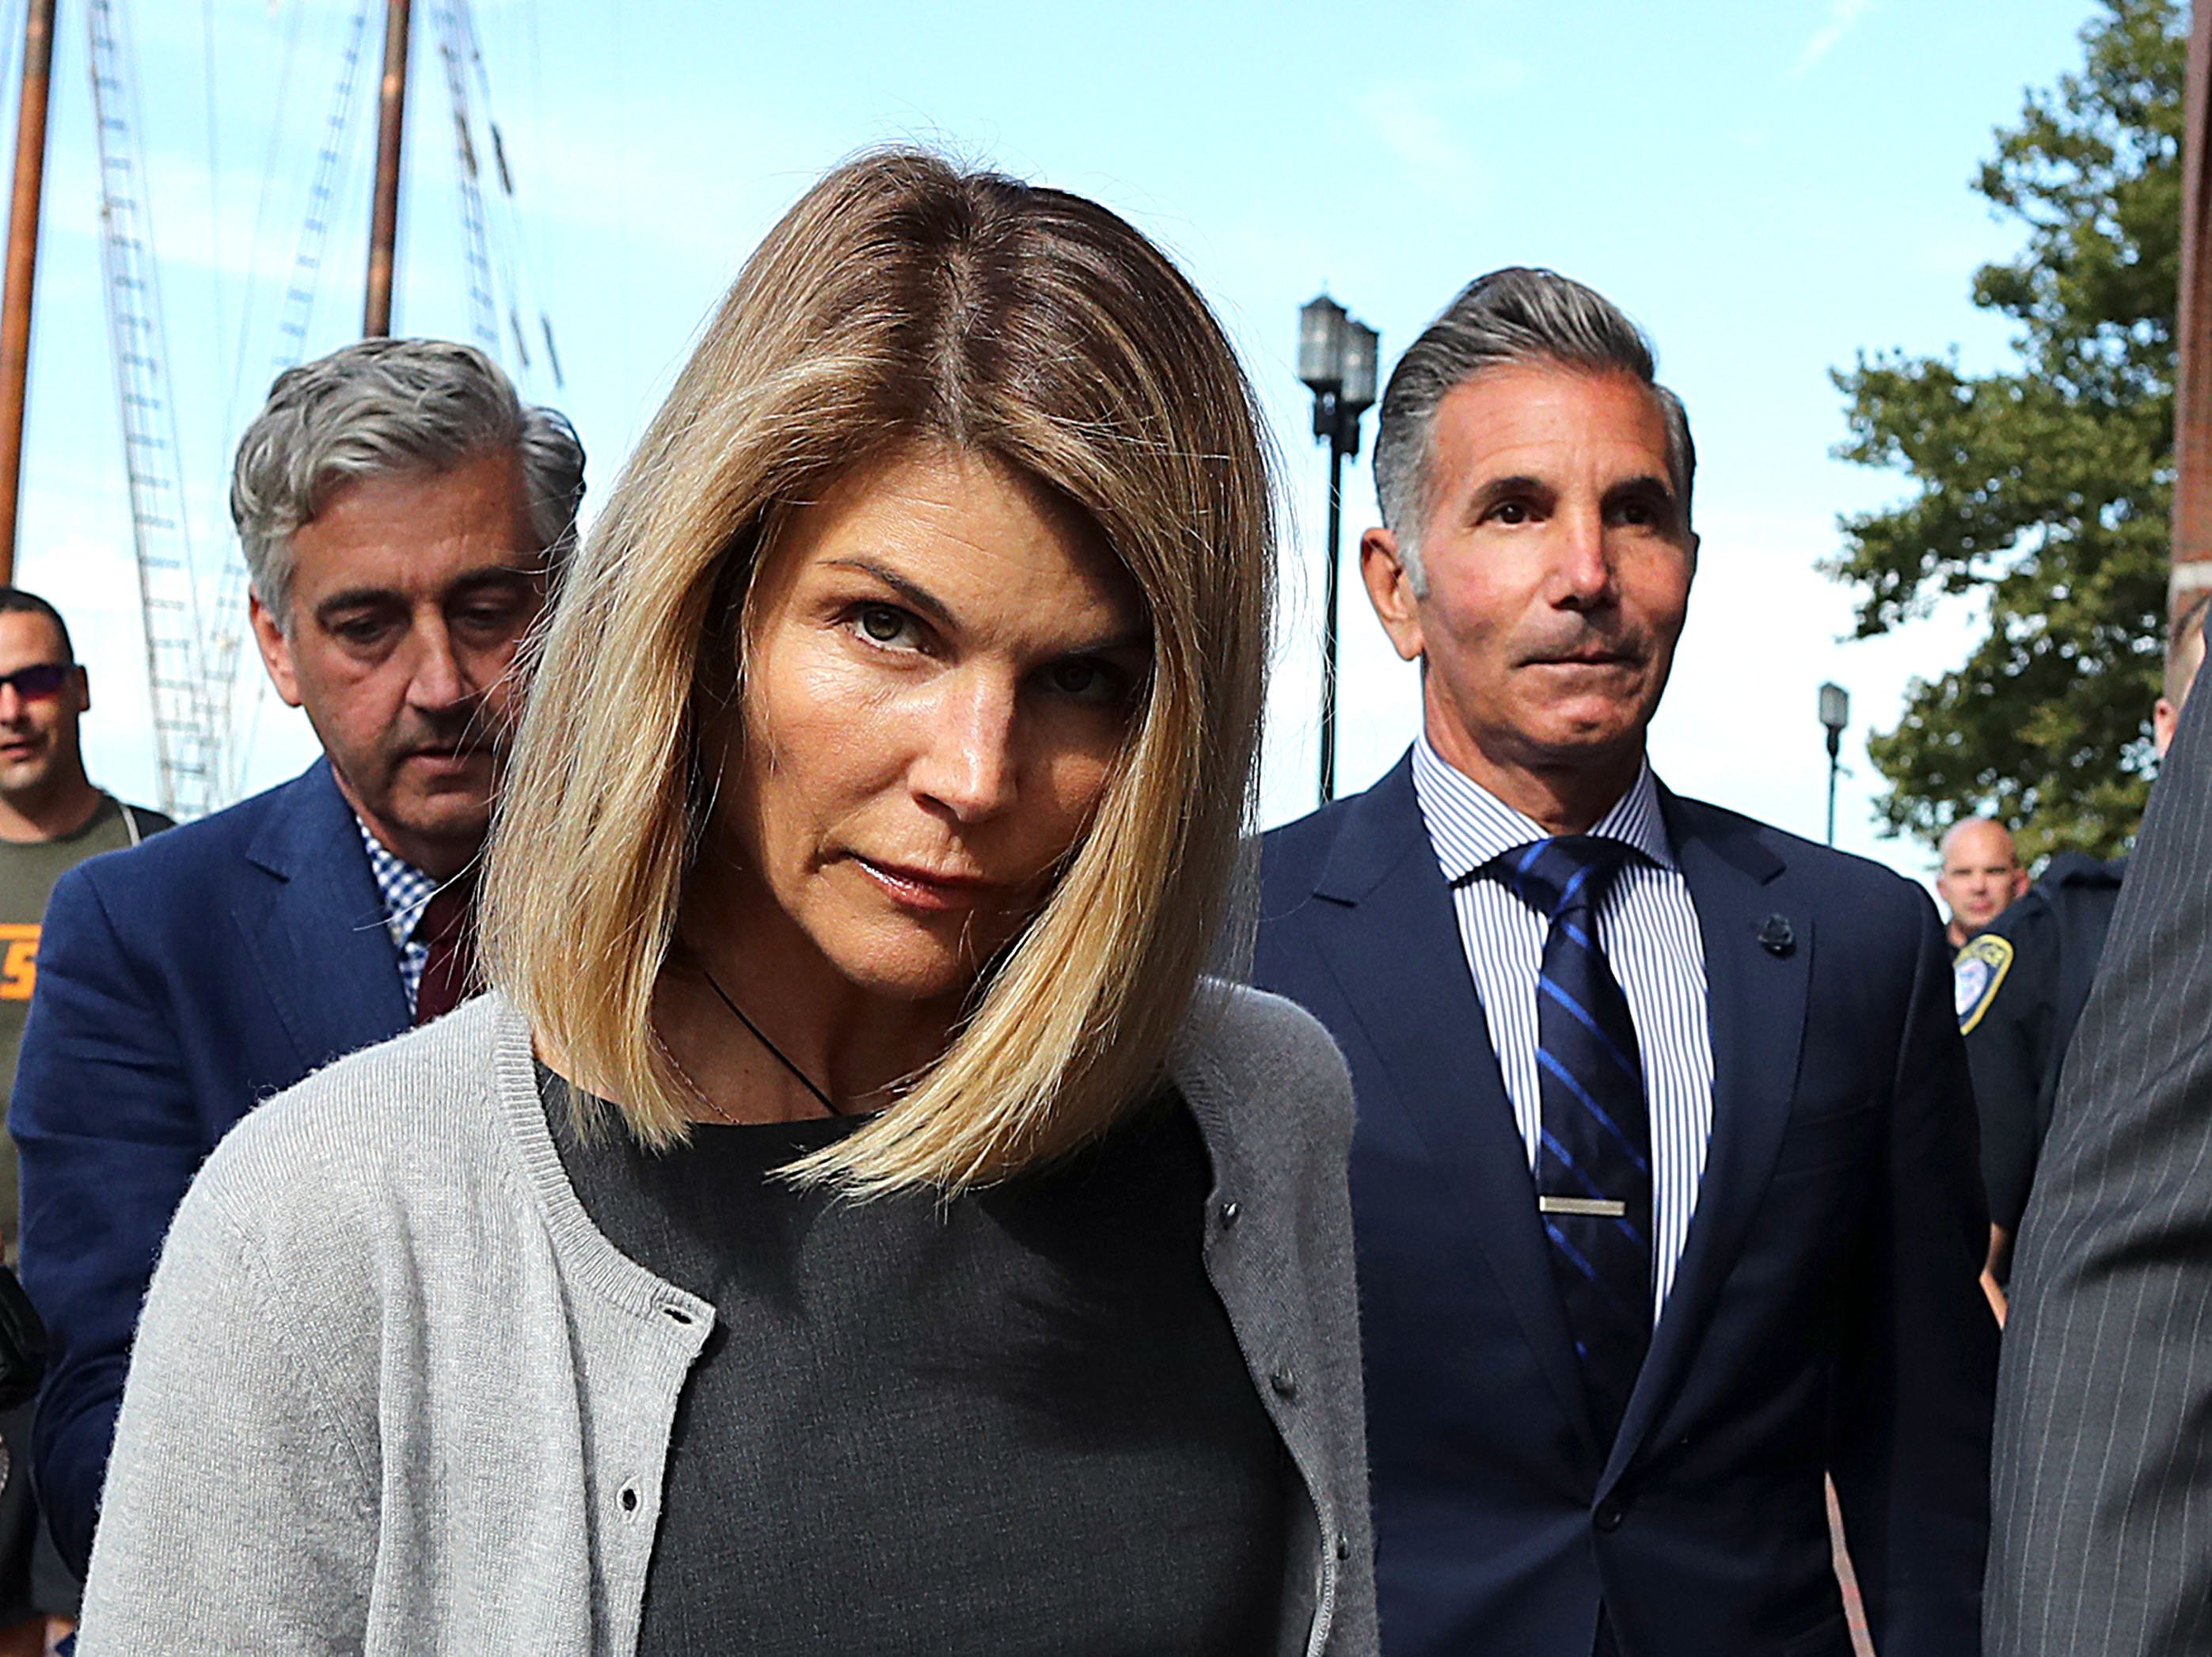 Lori Loughlin and Mossimo Giannulli appear at the John Joseph Moakley, Boston Courthouse in August 27, 2019 | Photo: Getty Images